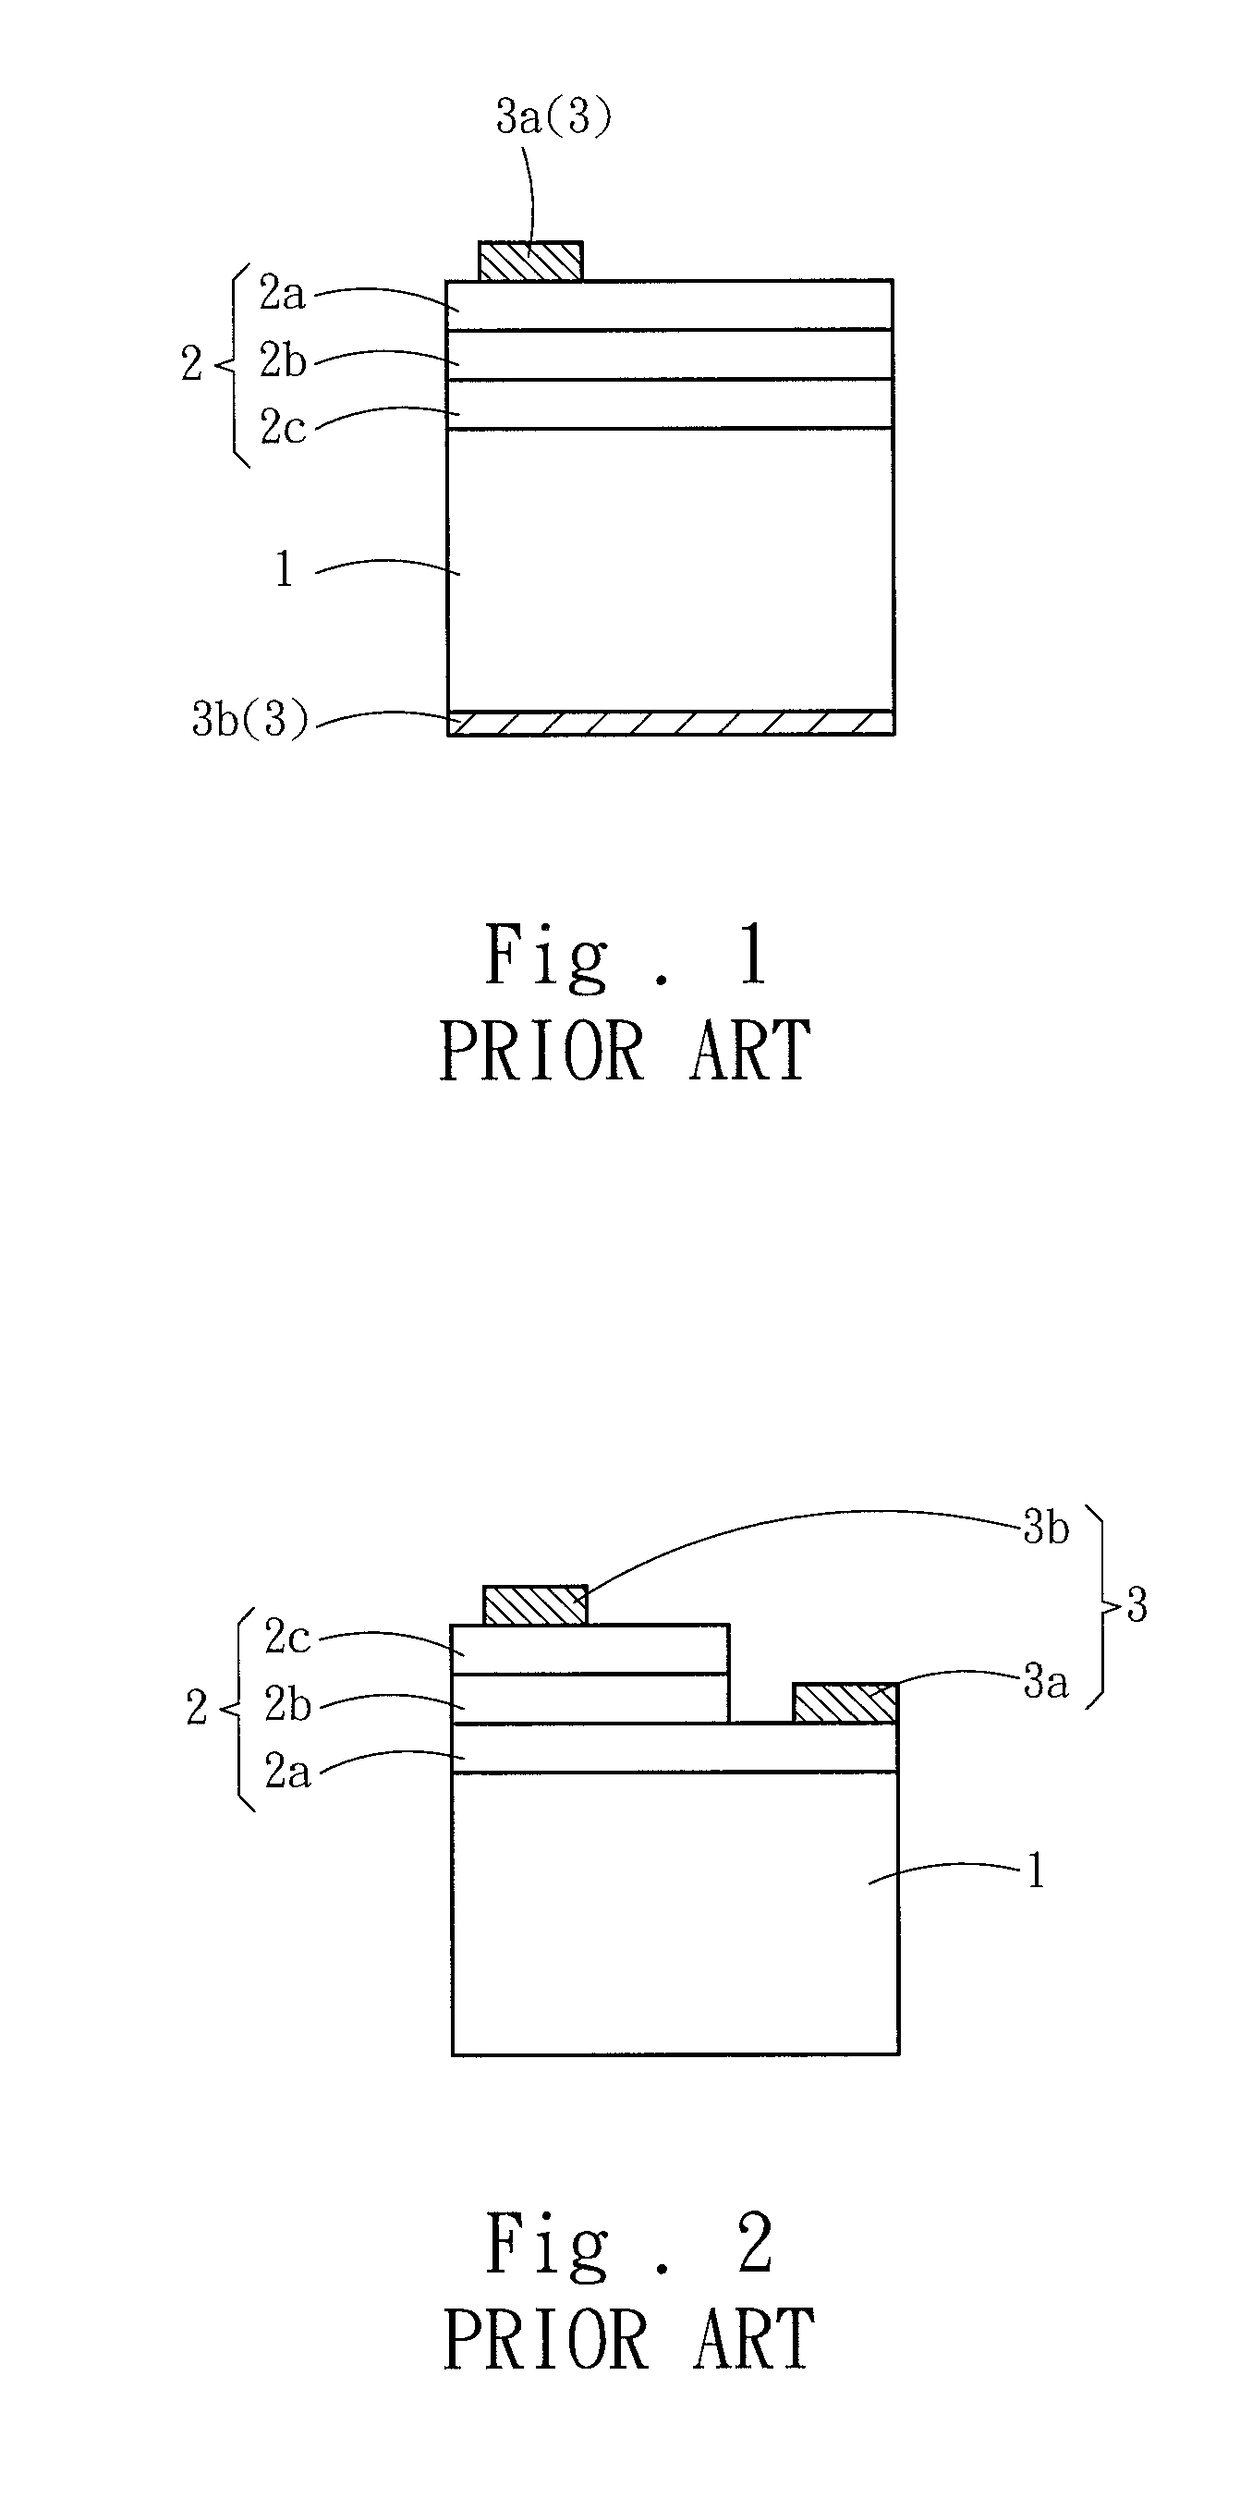 Light emitting diode capable of generating different light colors over single wafer